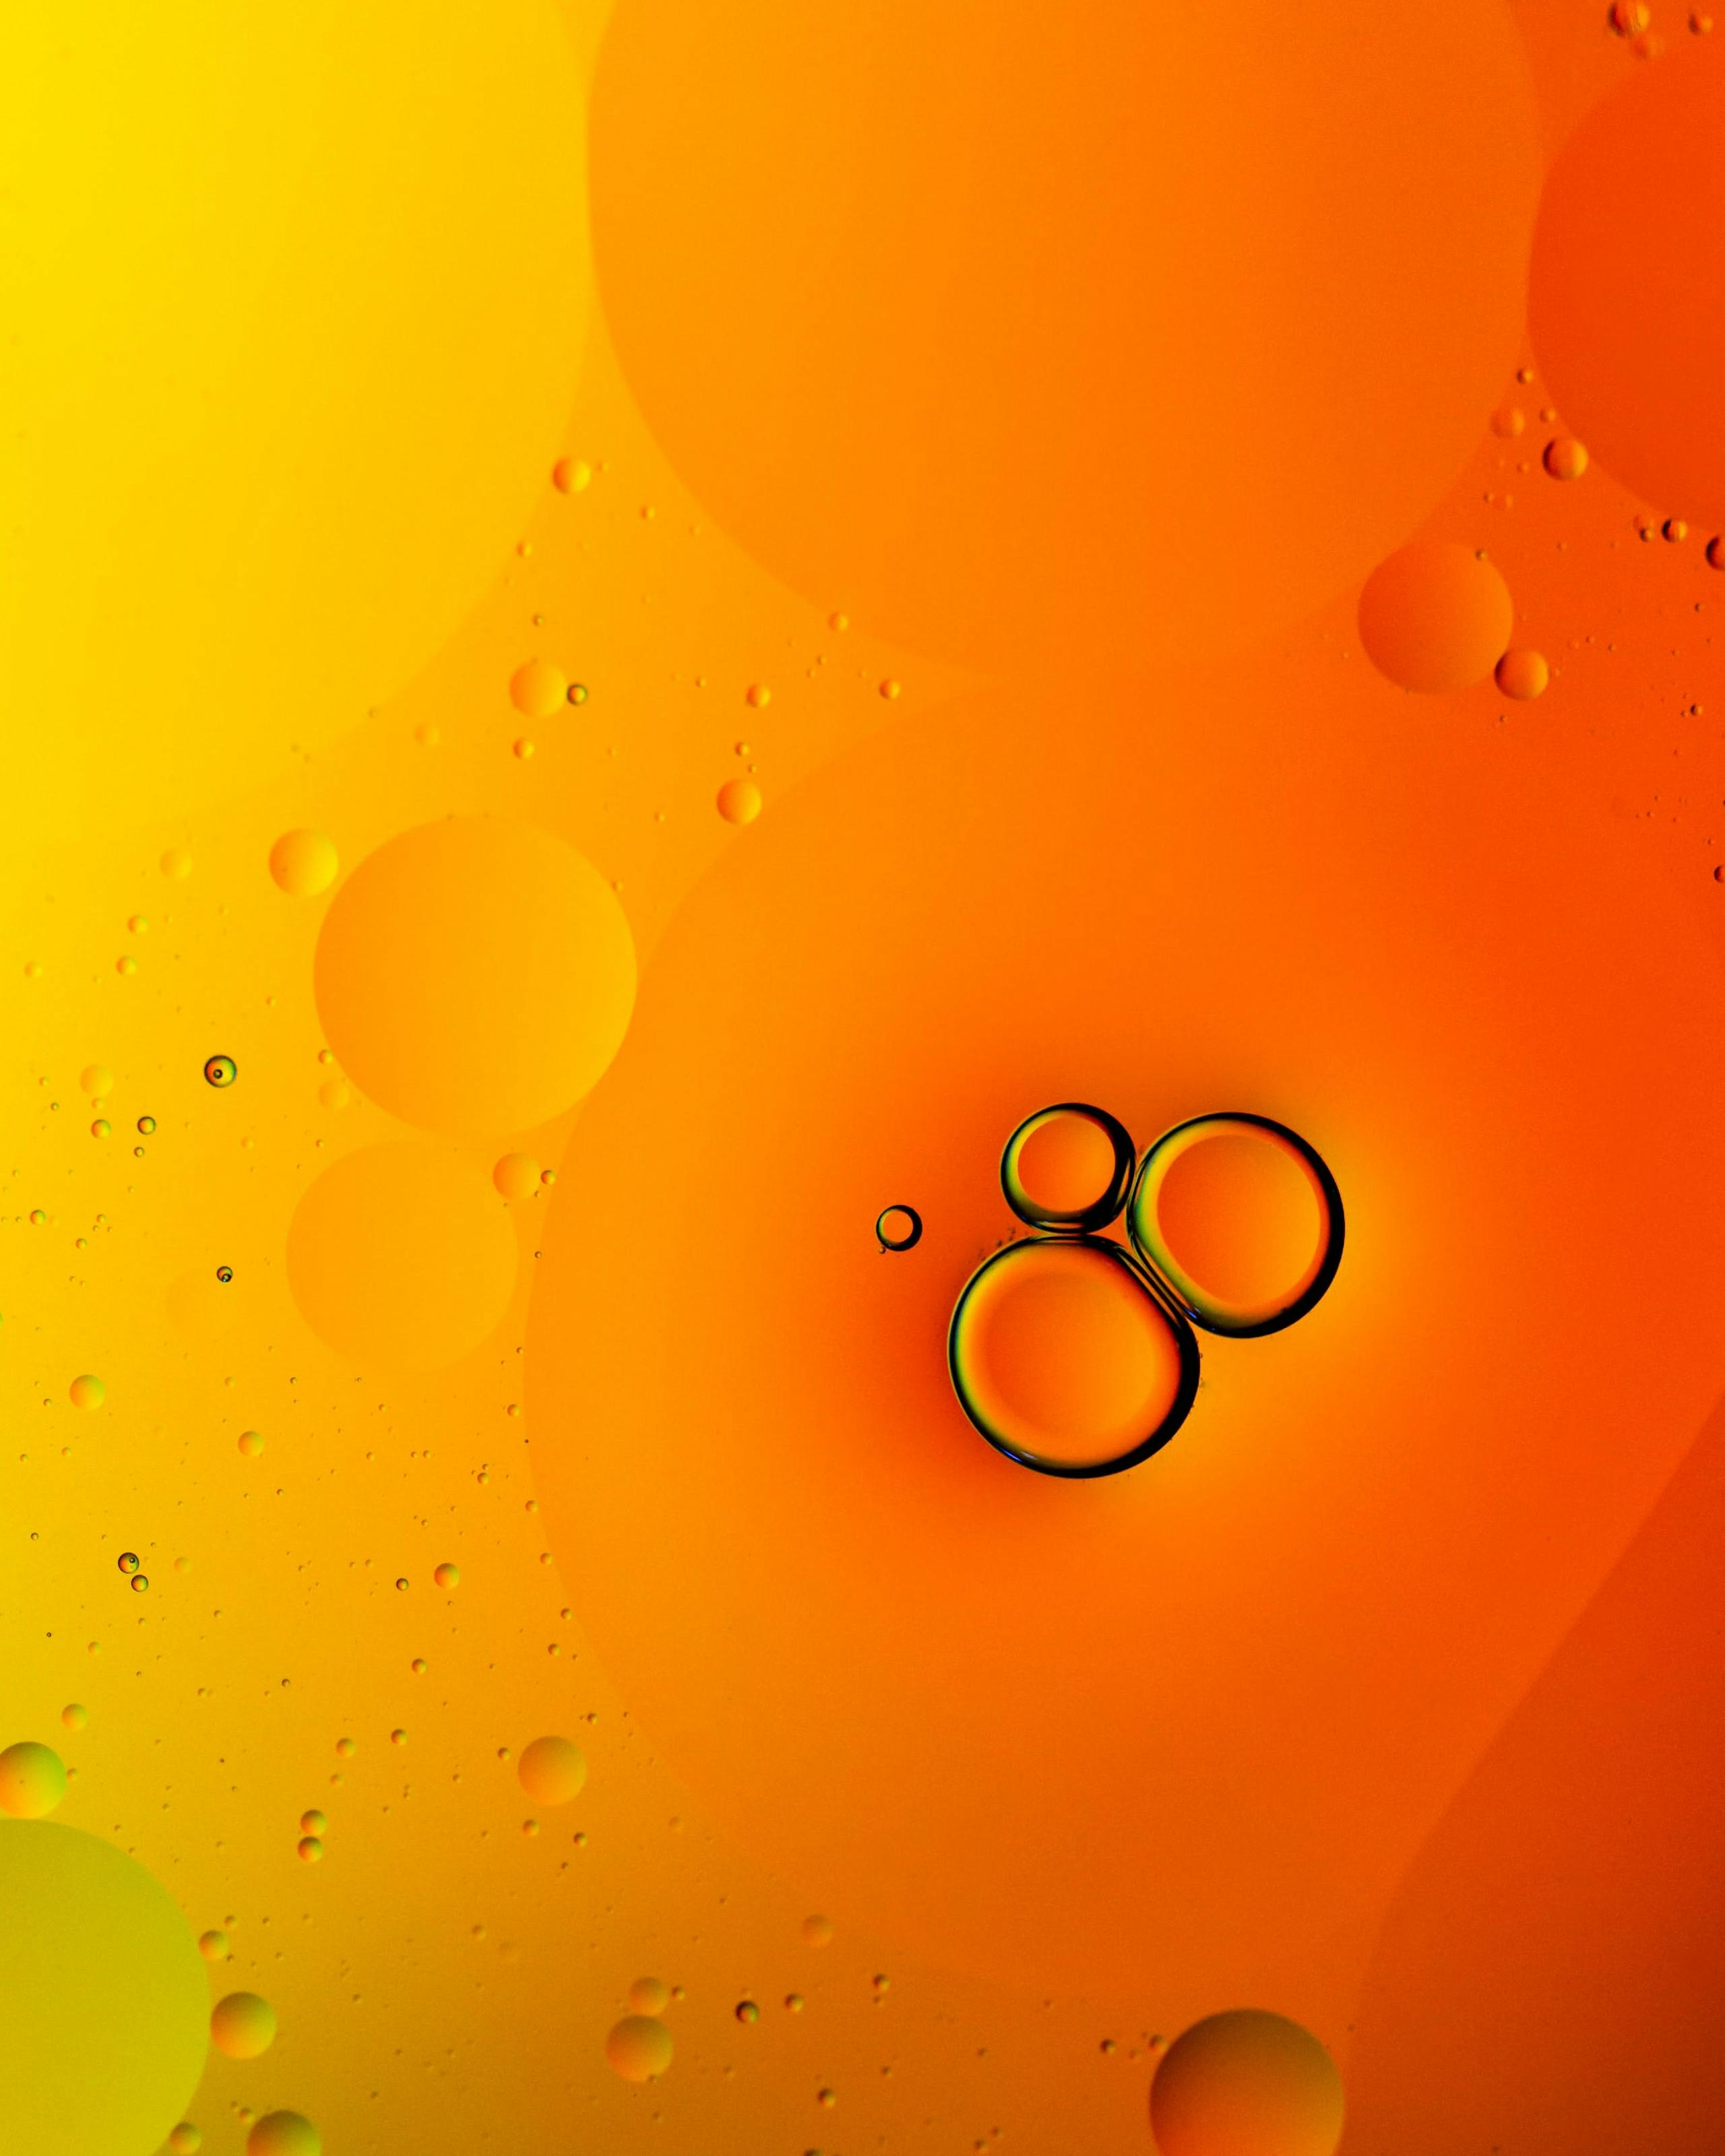 Oil droplets in water on and orange and yellow background